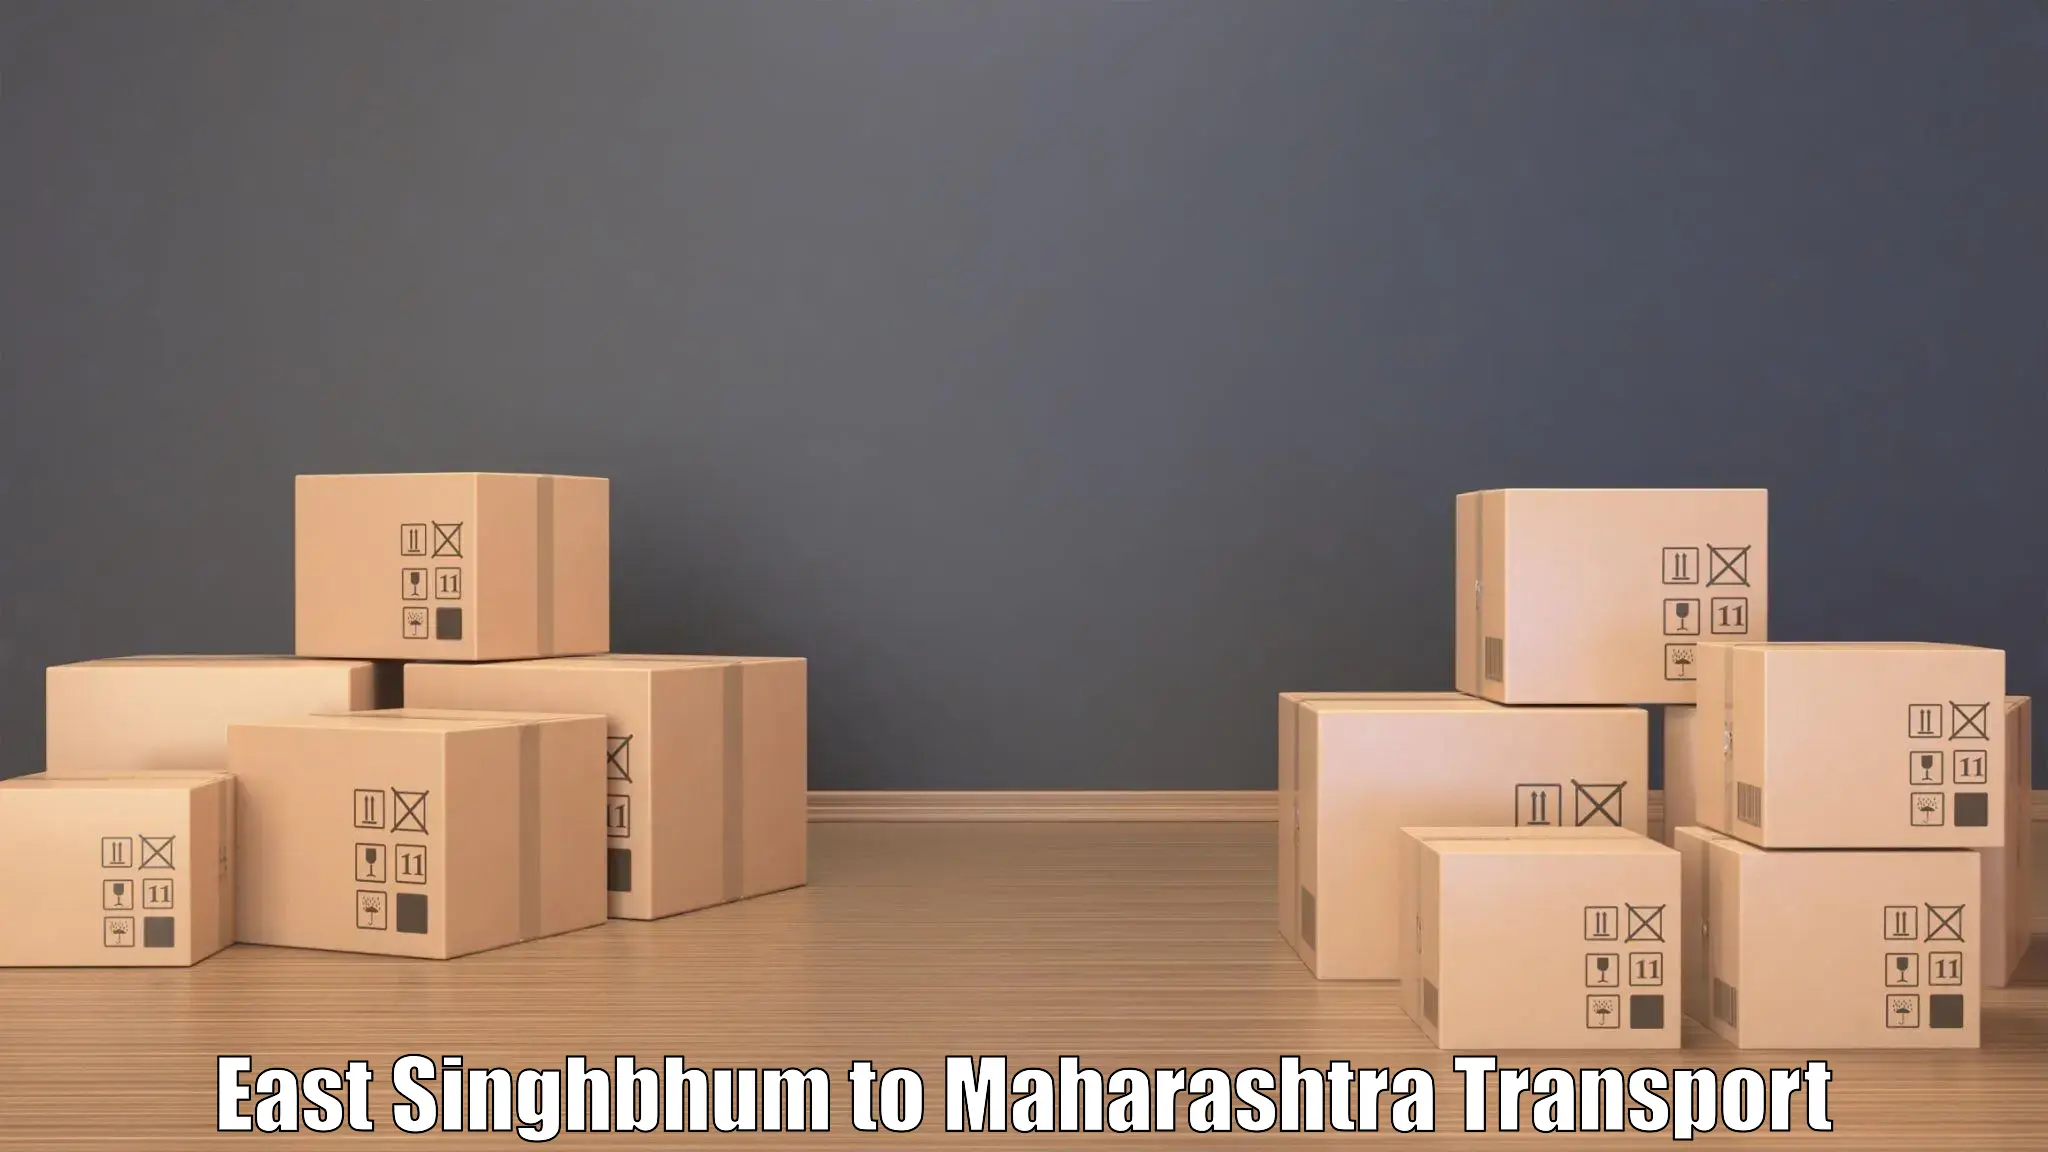 Air freight transport services East Singhbhum to Osmanabad